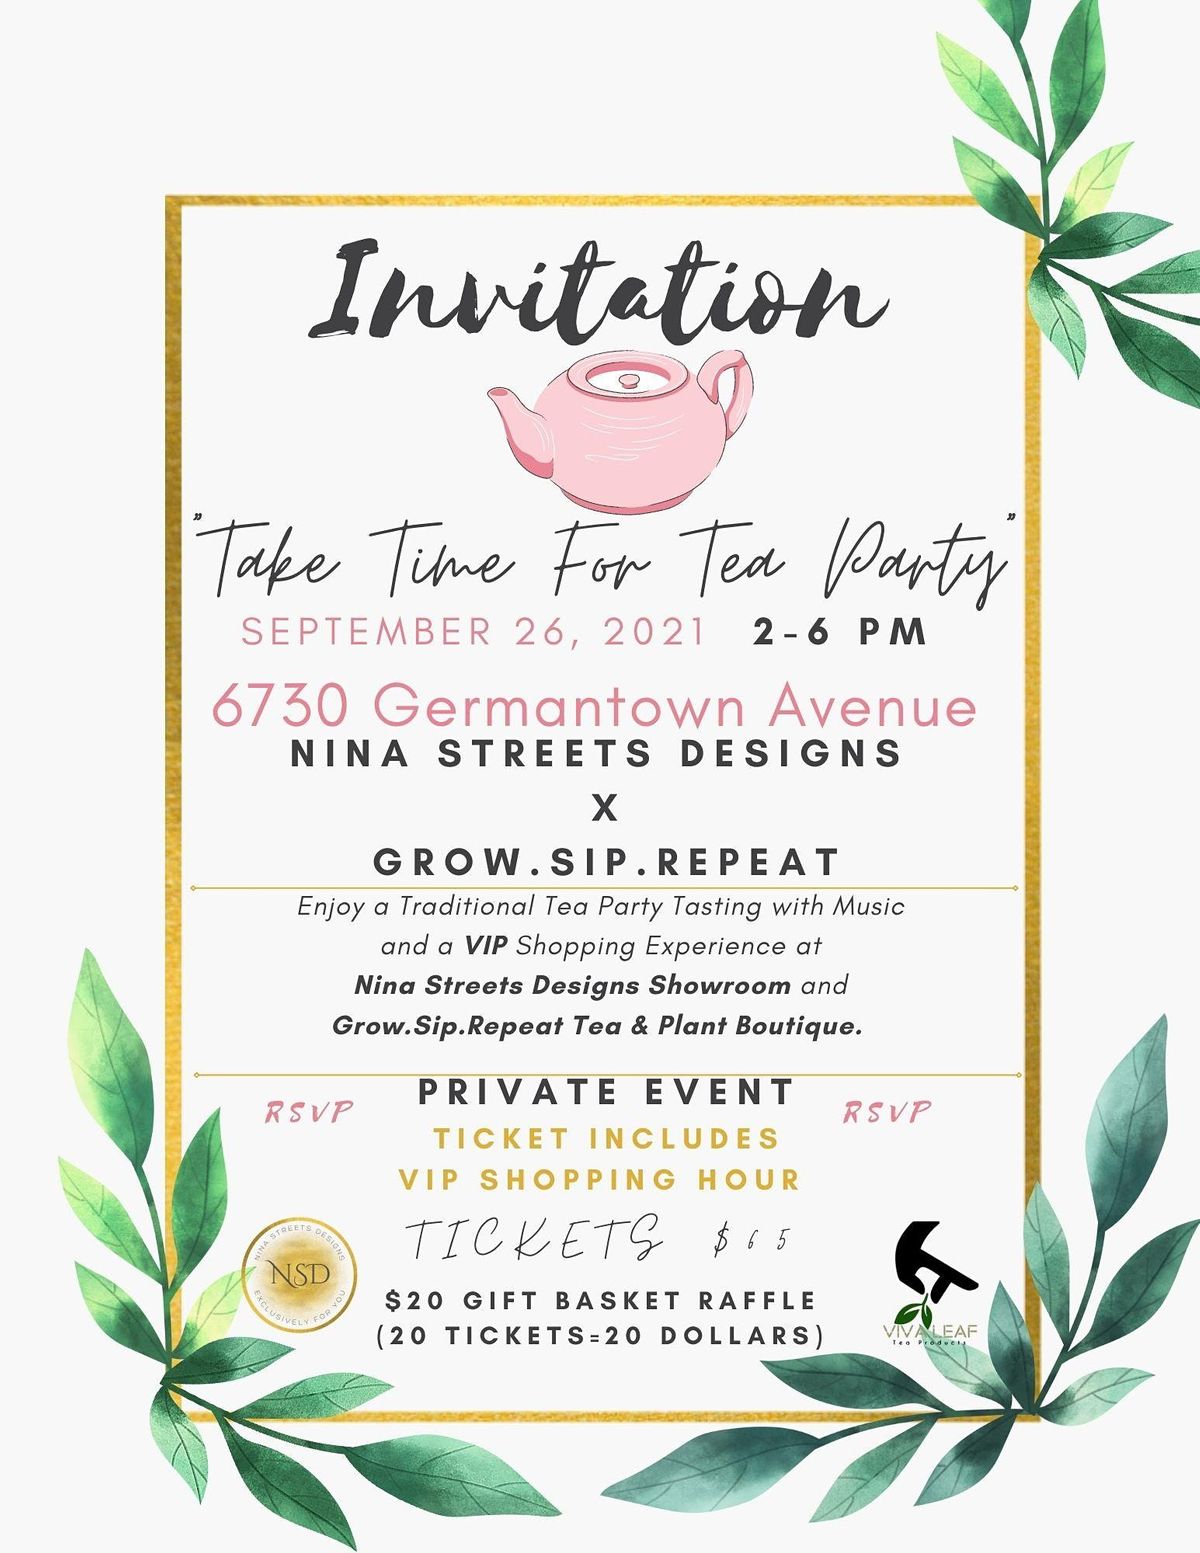 Take Time For Tea Party- Hosted by Nina Streets Designs x Grow. Sip. Repeat